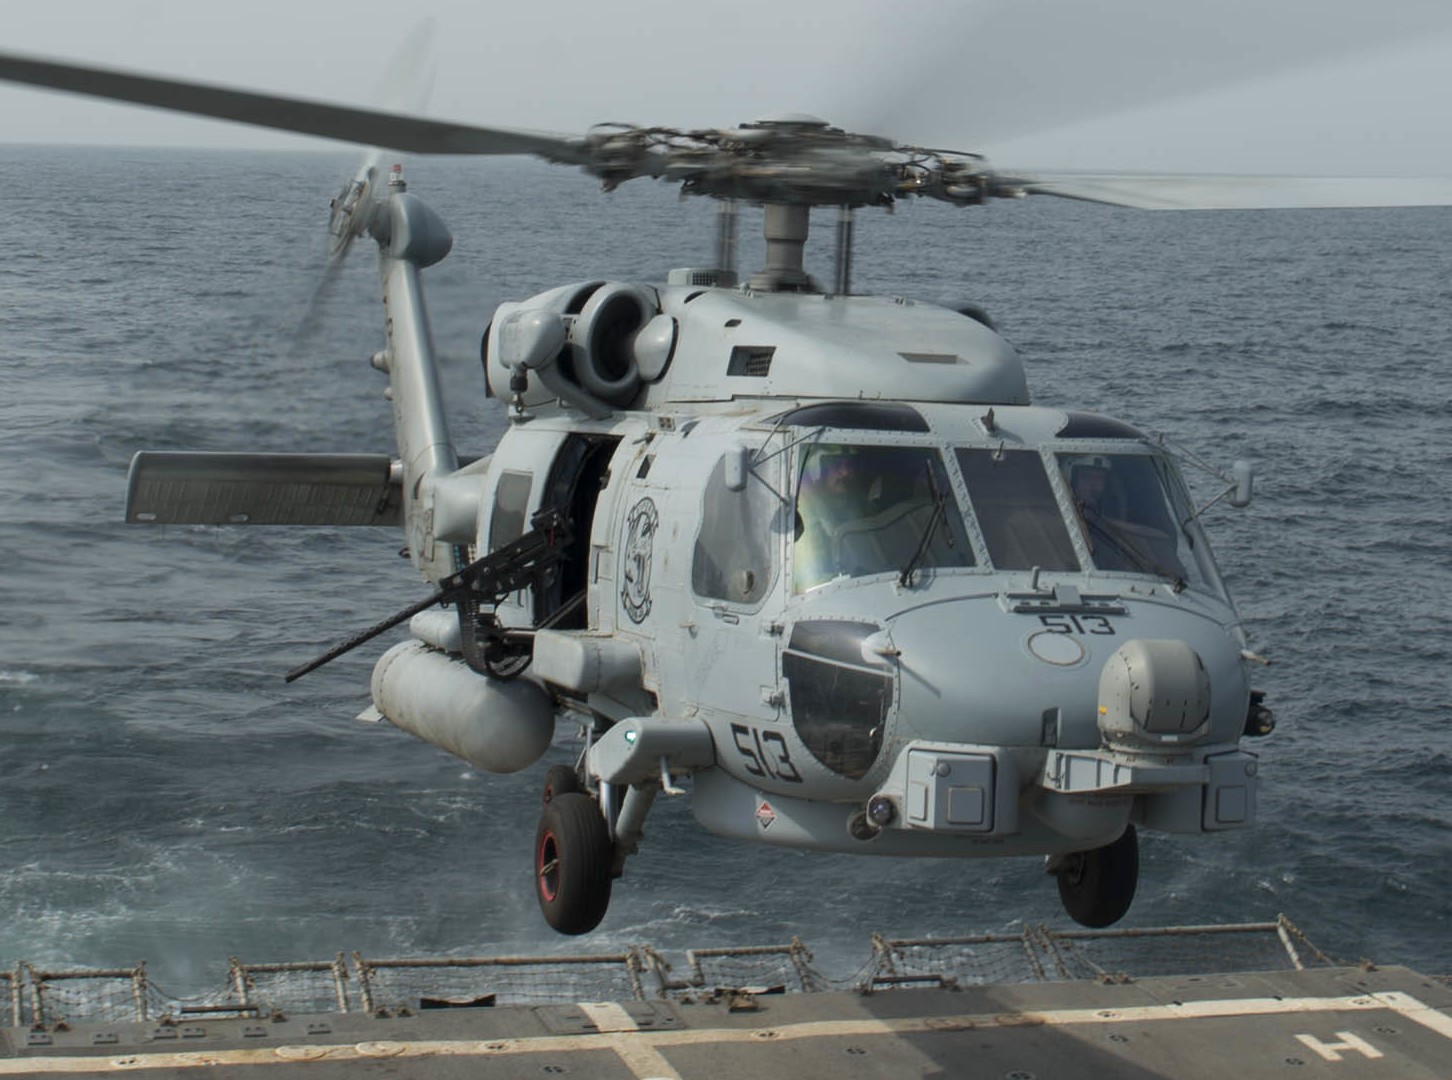 hsm-48 vipers helicopter maritime strike squadron mh-60r seahawk 2016 21